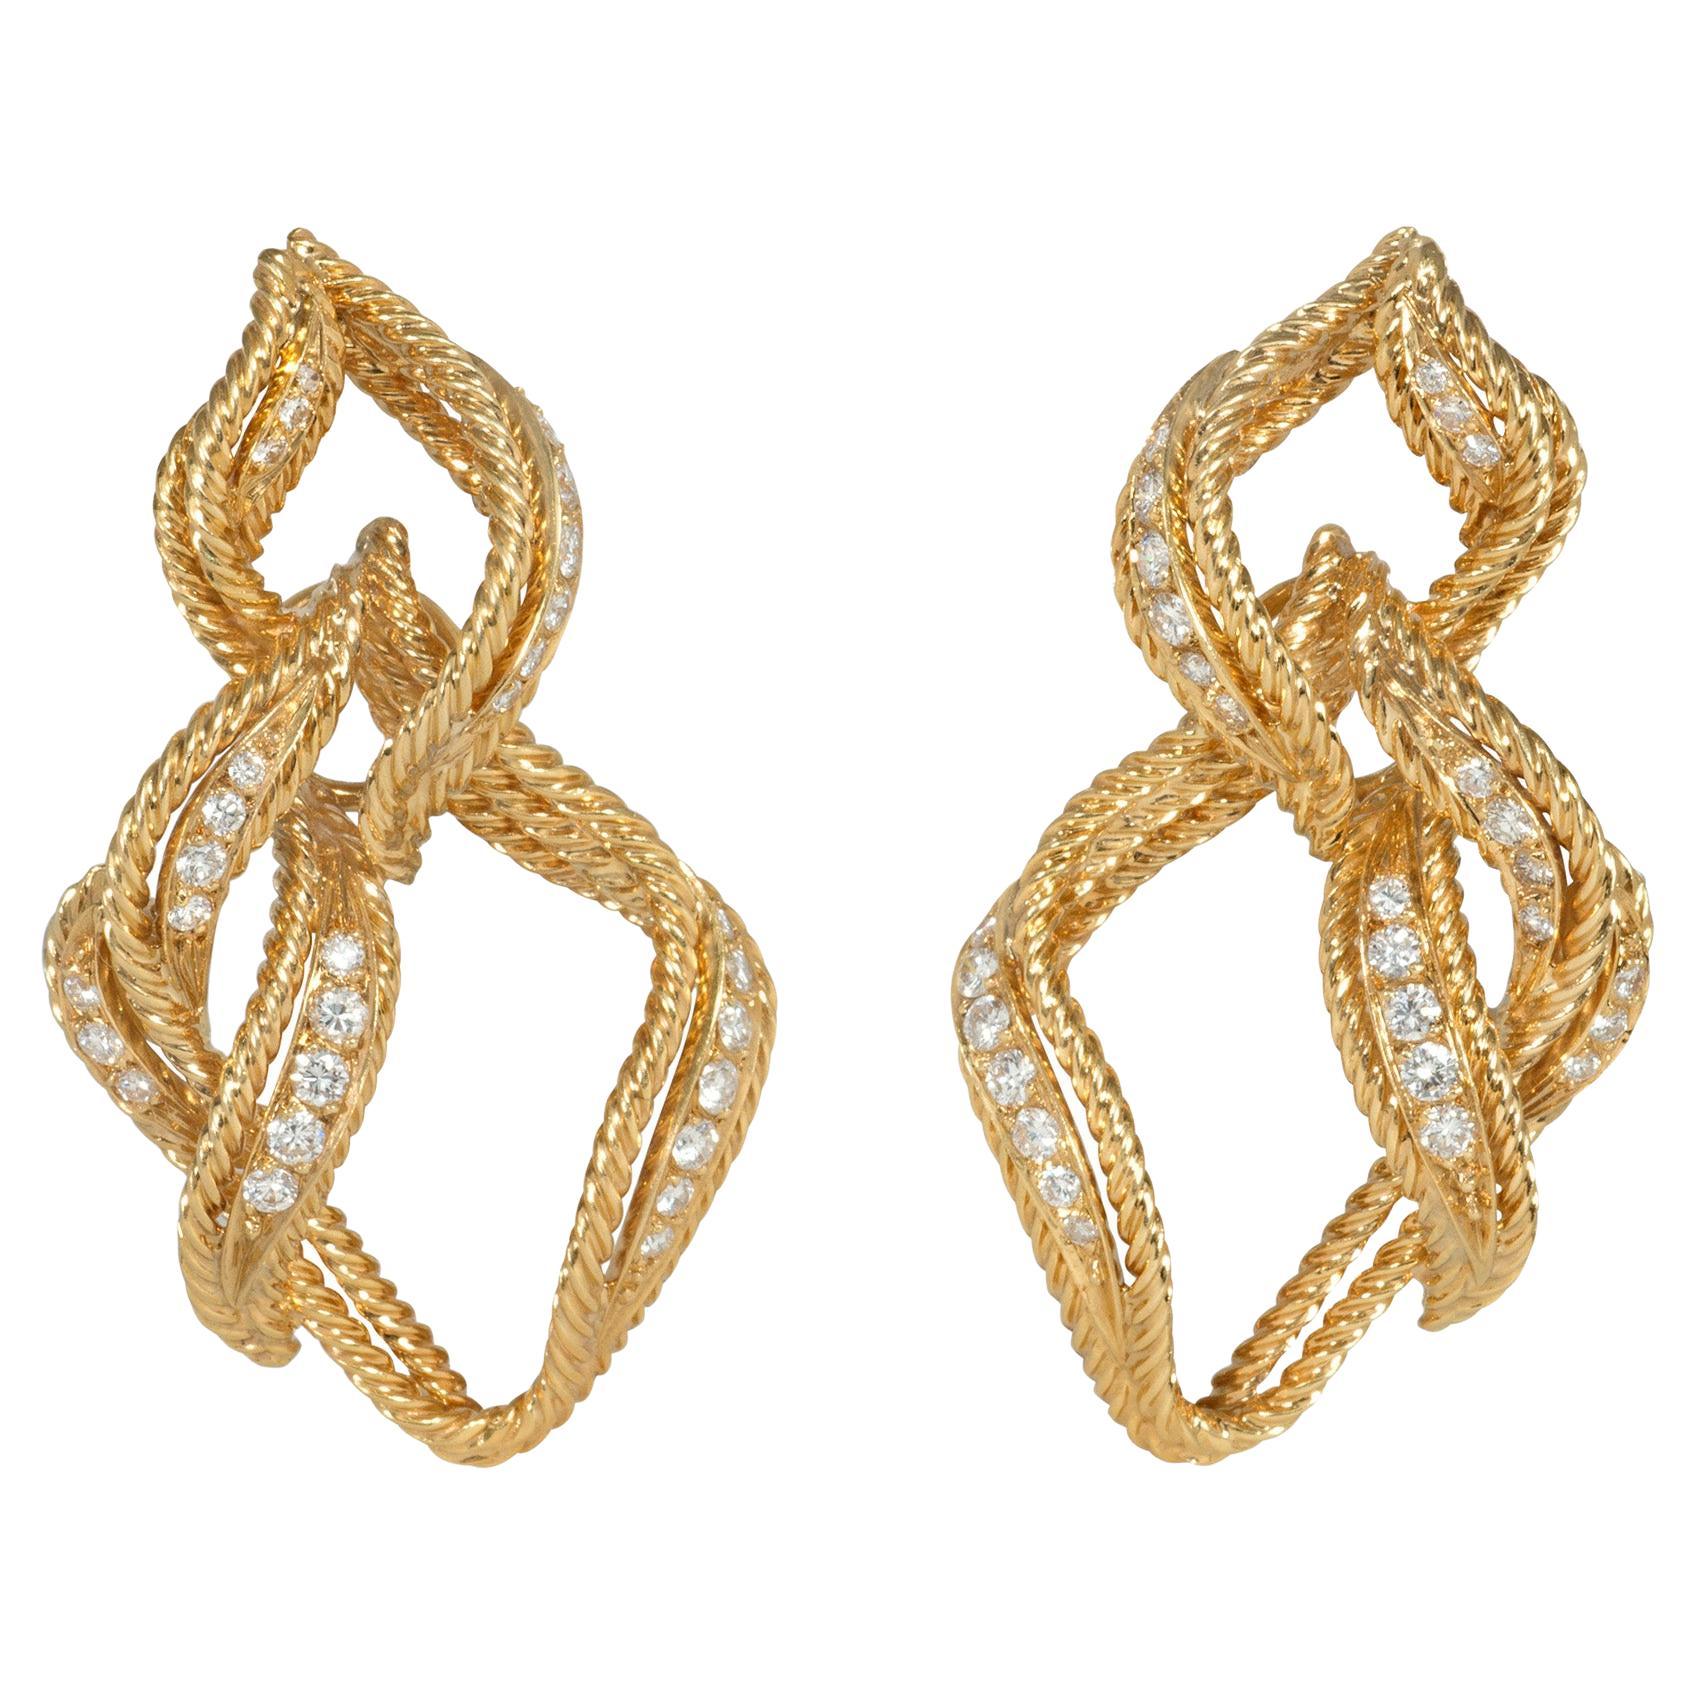 Chaumet, Paris Estate Gold and Diamond Stylized Flame Clip Earrings